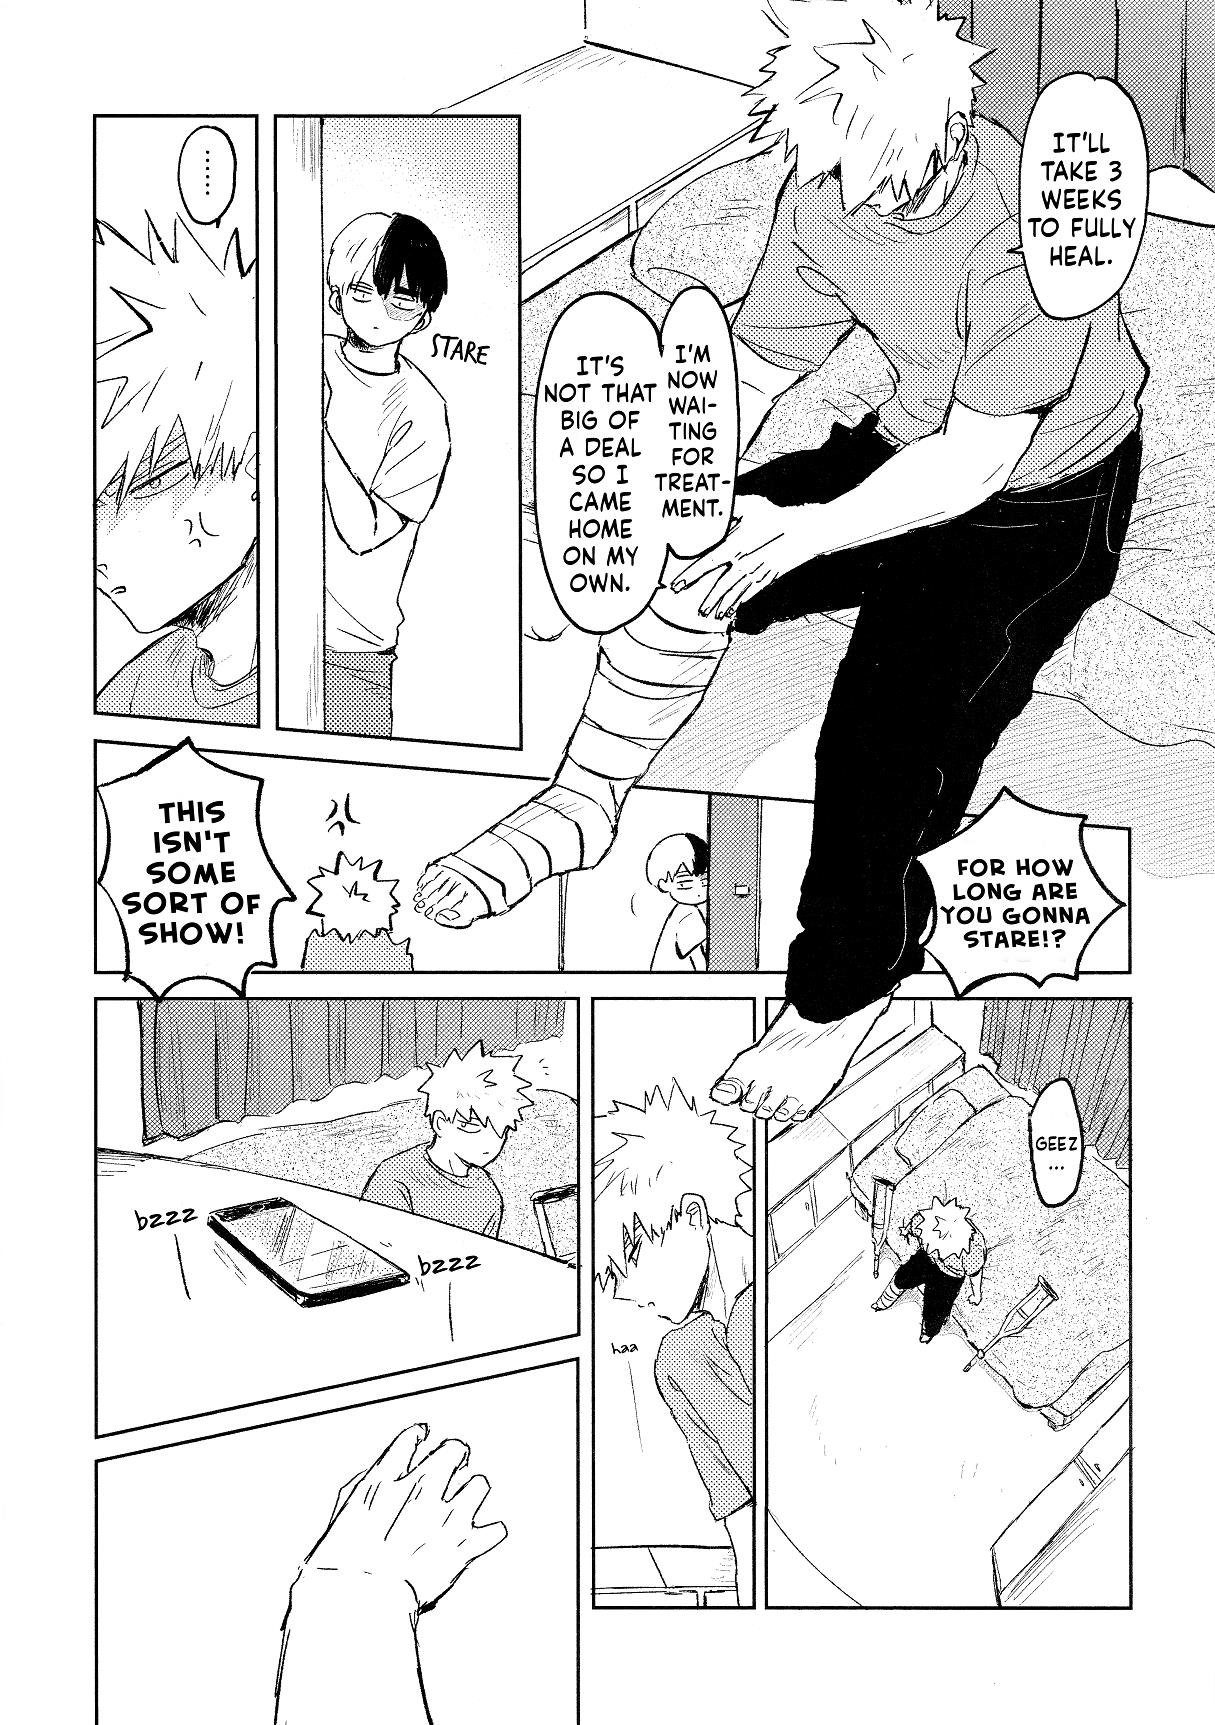 Cheers! - Shouto X Katsuki Marriage Anthology Vol.1 Chapter 16: Their From Now On - Picture 3